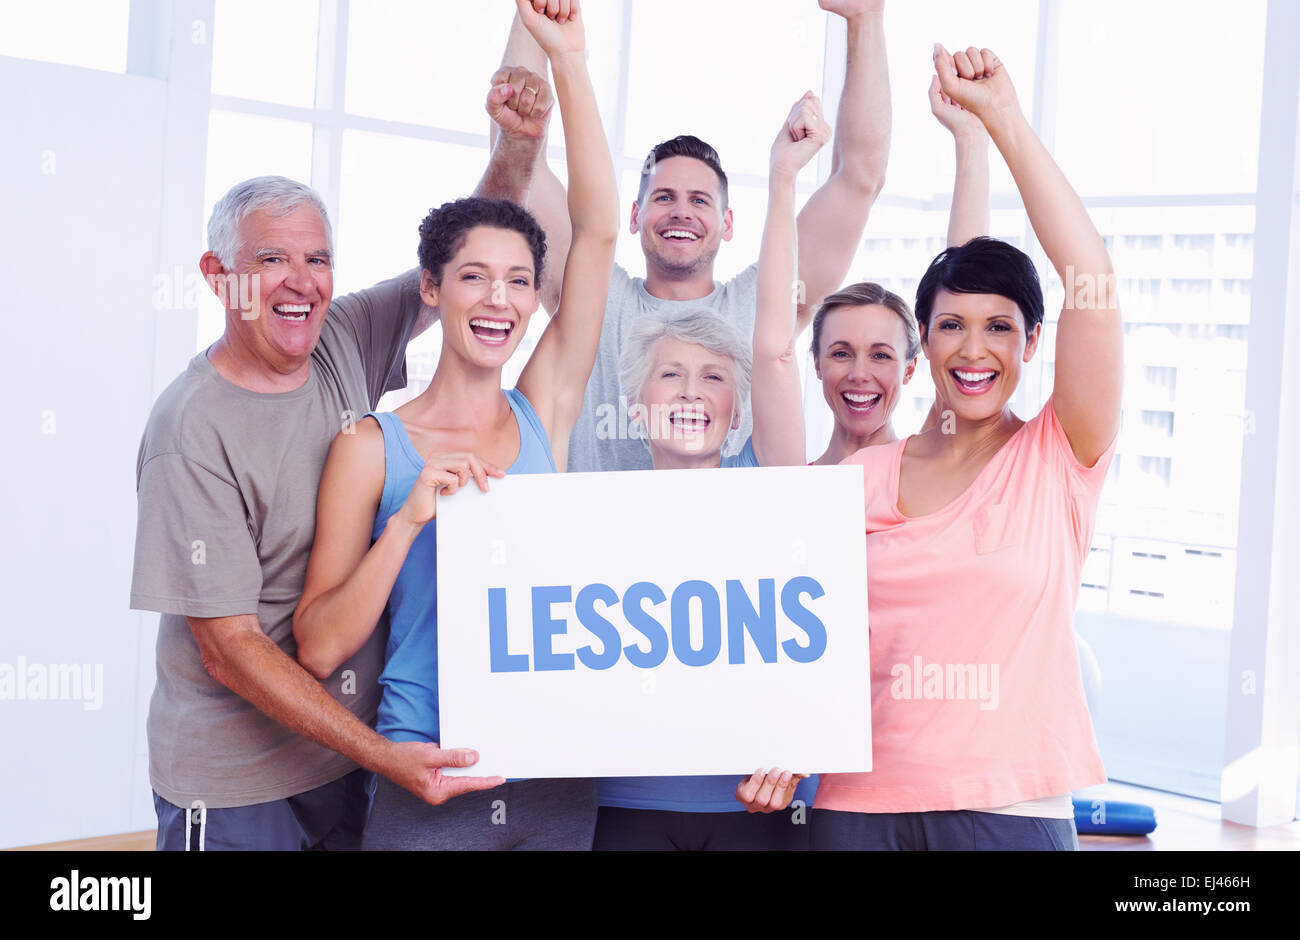 Lessons against portrait of happy fit people holding blank board Stock Photo